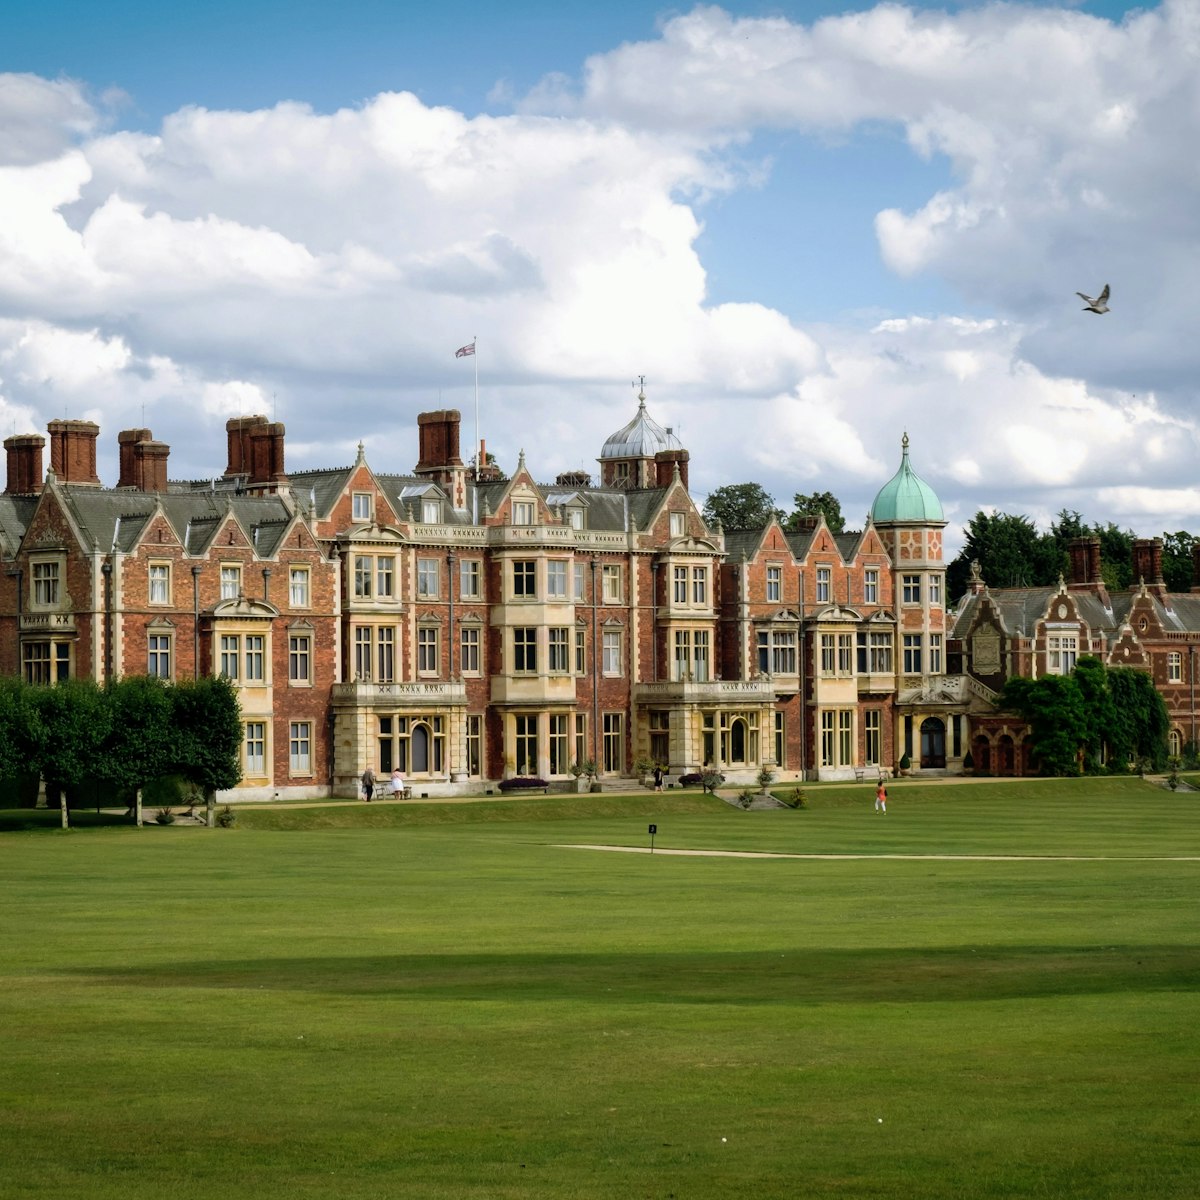 Located in Norfolk, Sandringham House is one of two personal and private residences owned by the English Royal Family. The residence - which is occupied since Elizabethan times - is one of the most loved by the Queen, who uses to spend here the Christmas Day and year-end holidays.